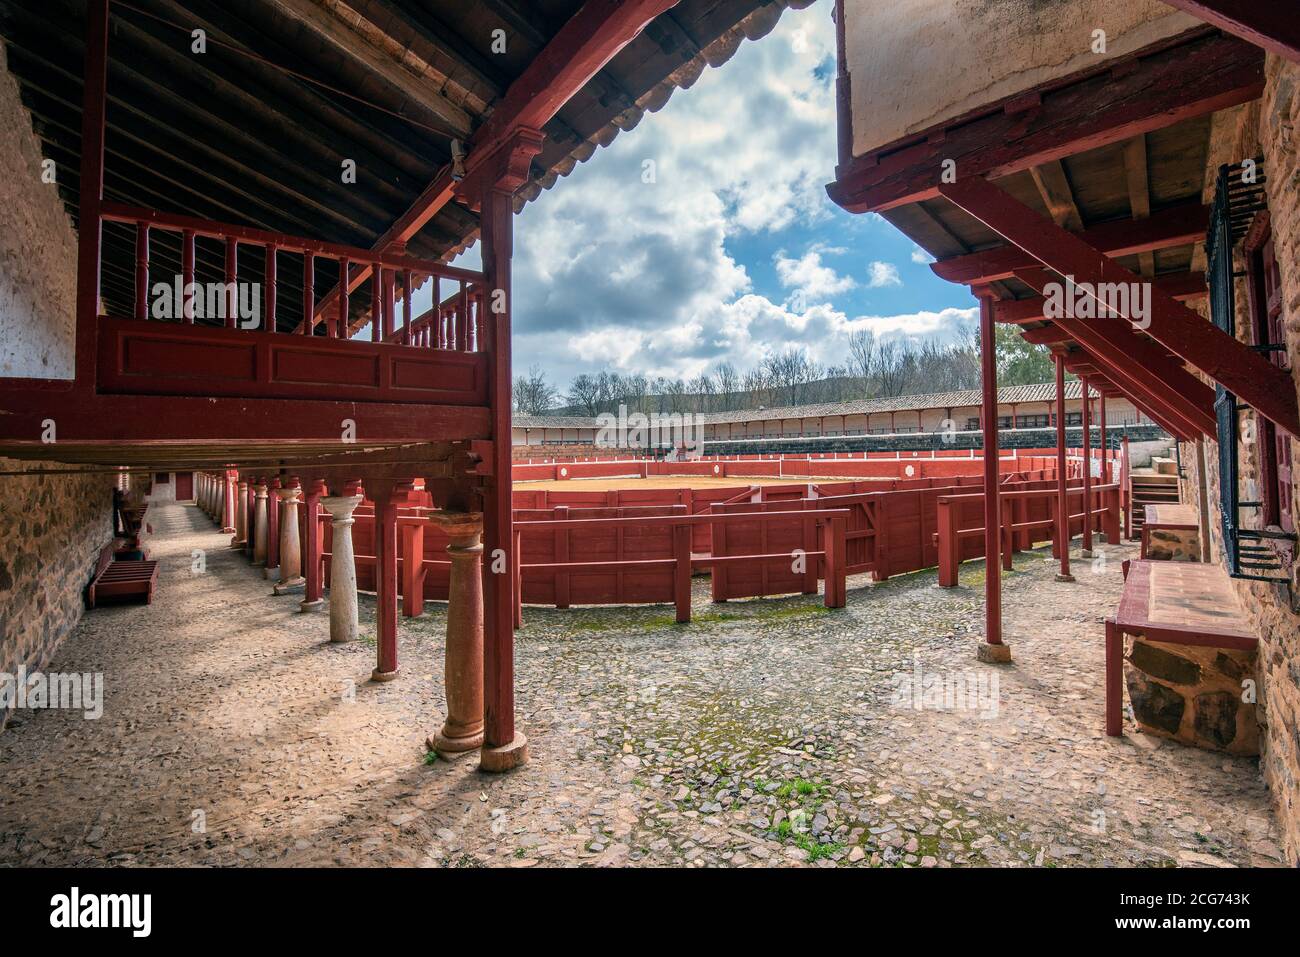 Harrows of a bullring supported by columns and wooden beams Stock Photo